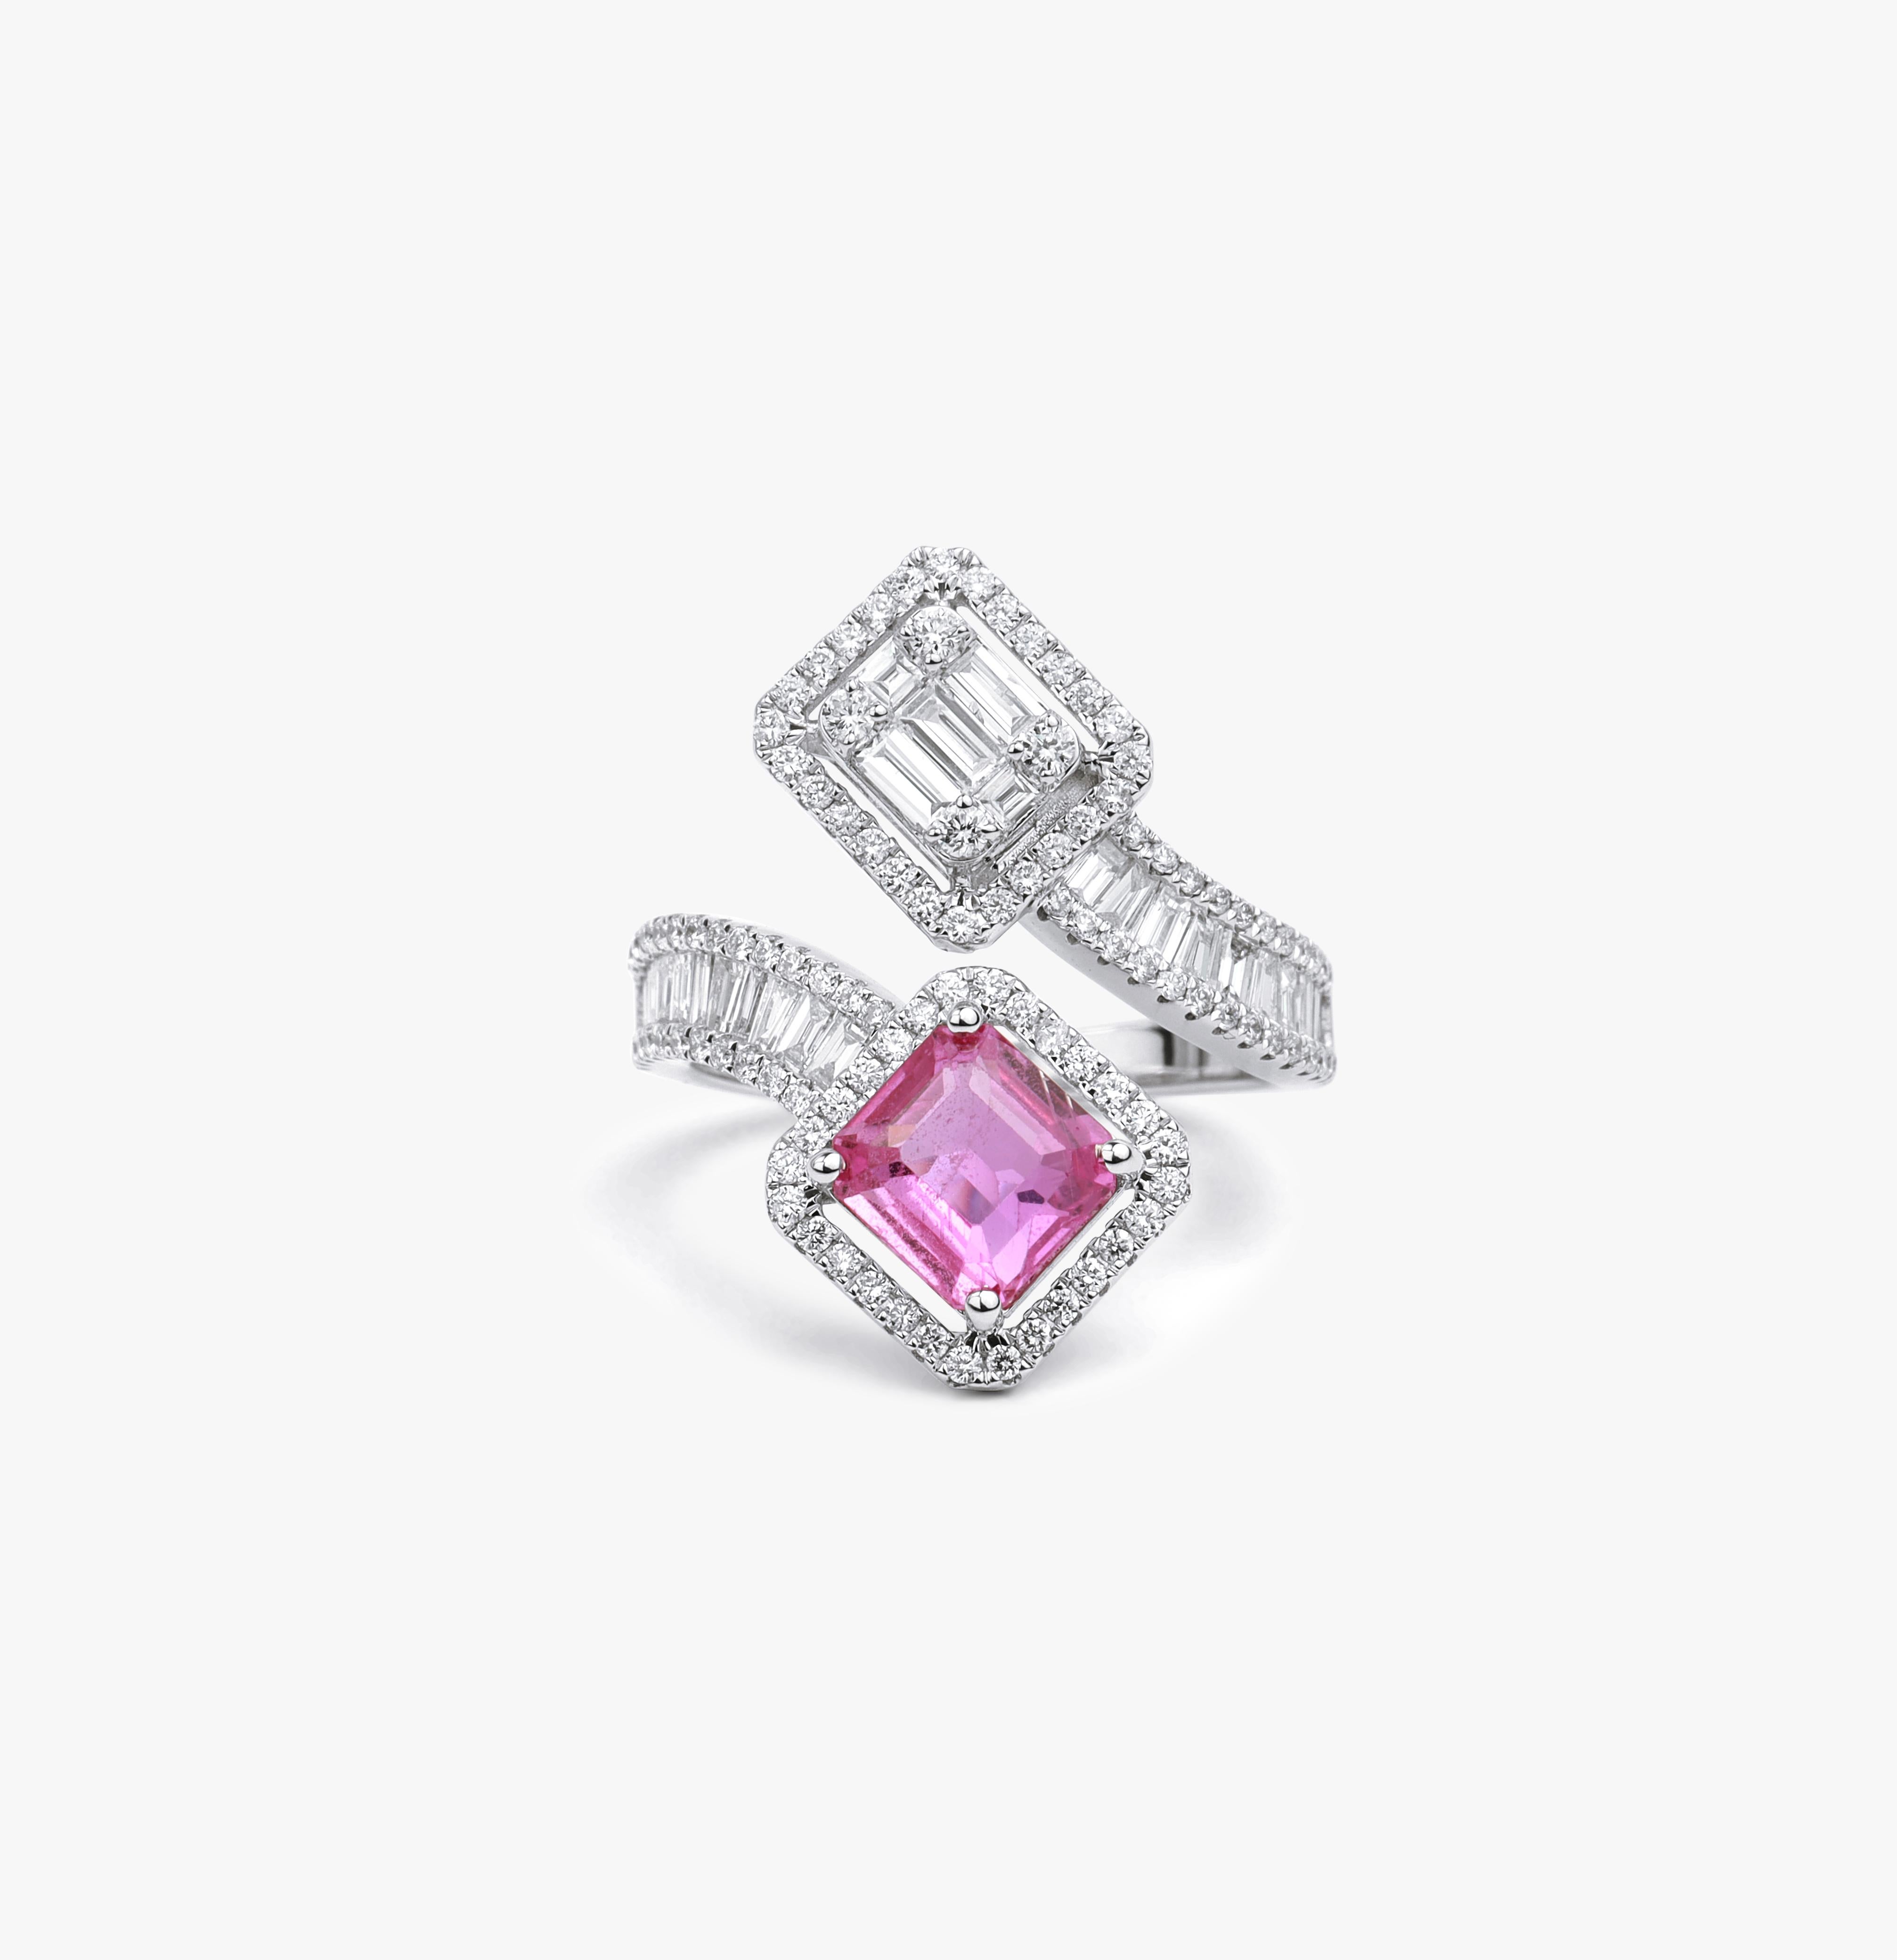 Emerald Cut 2 Carat Pink Sapphire Diamond Baguette Cut Cocktail Engagement Ring

Available in 18k white gold.

Same design can be made also with other custom gemstones per request.

Product details:

- Solid gold (14k, 18k)

- approx. 2 carat CT